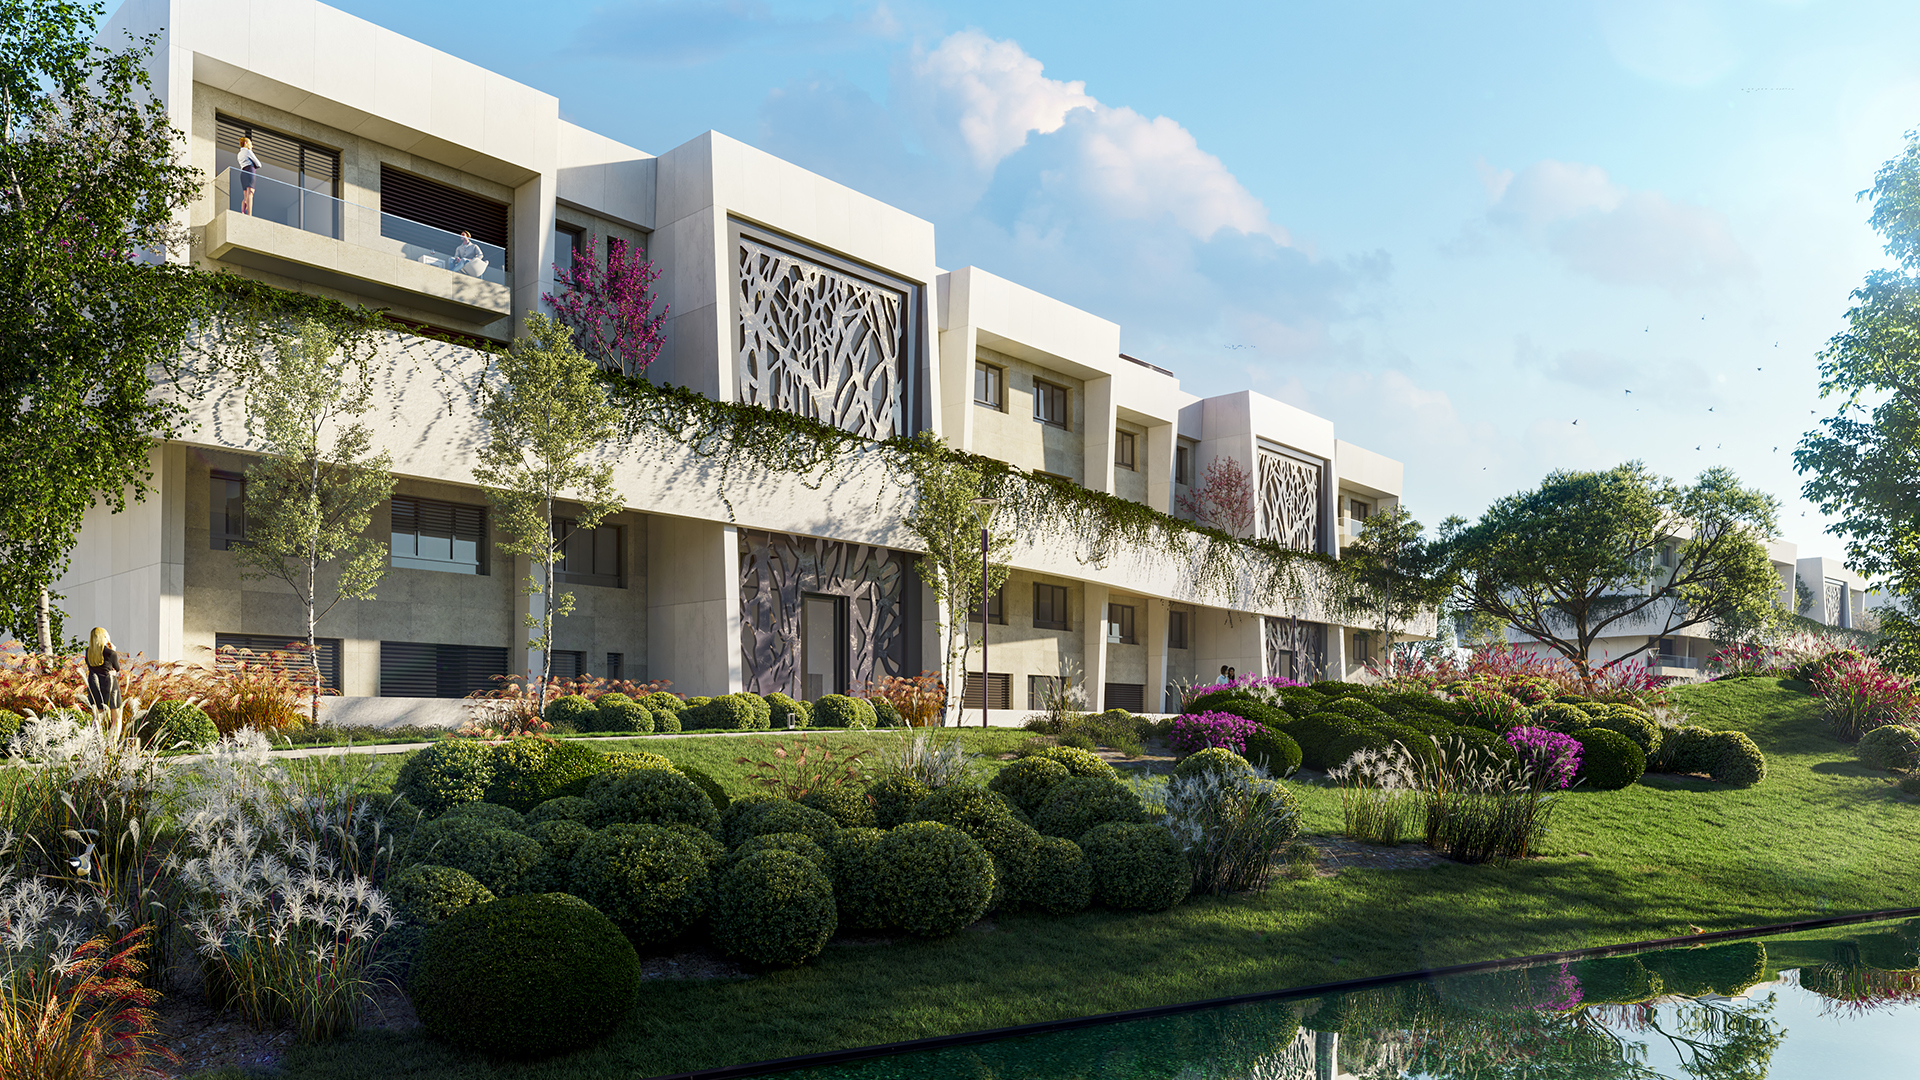 A residential area of luxury, privacy and comfort